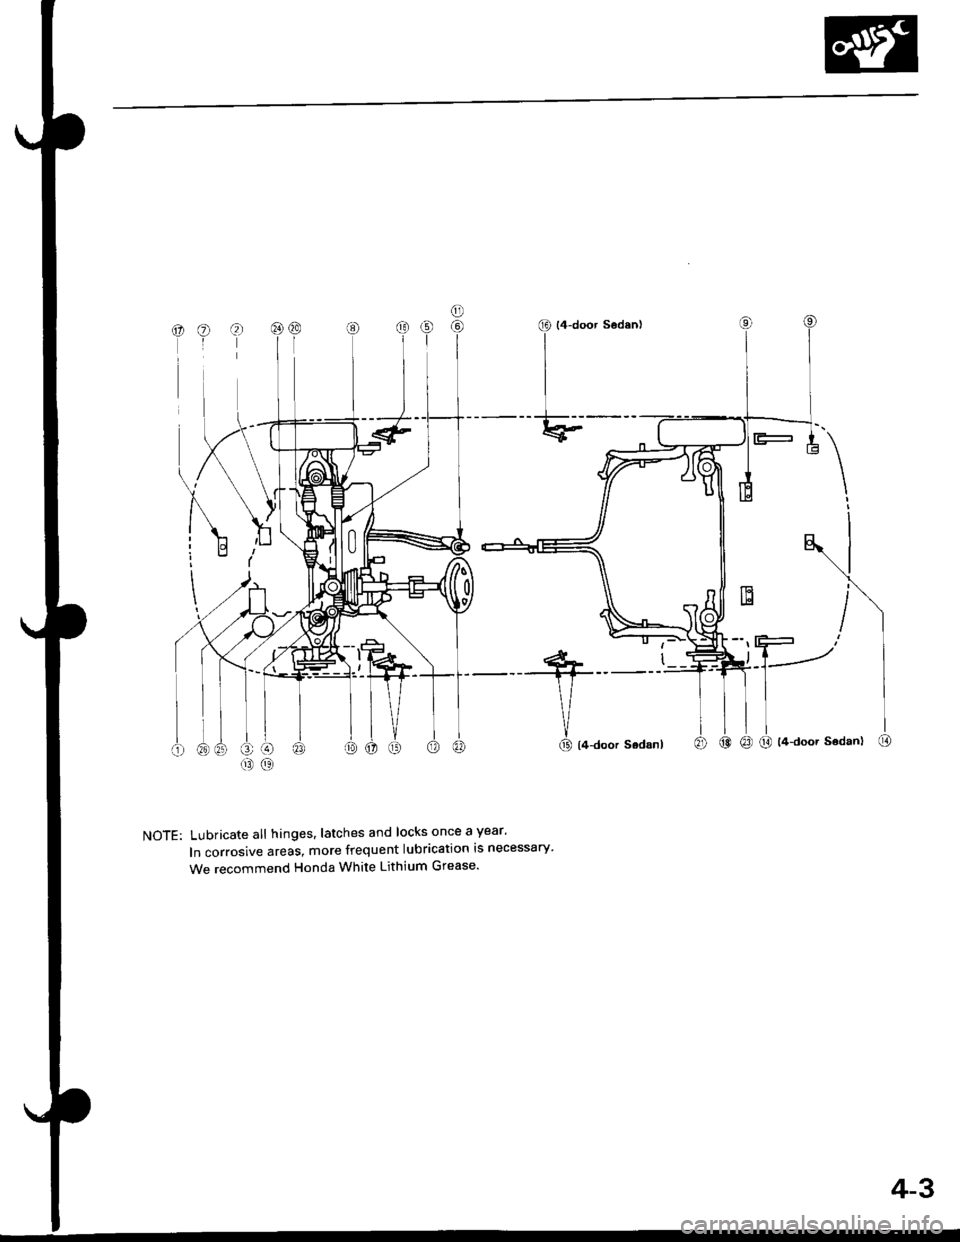 HONDA CIVIC 1998 6.G Manual PDF NOTE: Lubricate all hinges, latches and locks once a year
ln corrosive areas, more frequent lubrication is necessary
We recommend Honda White Lithium Grease
4-3 